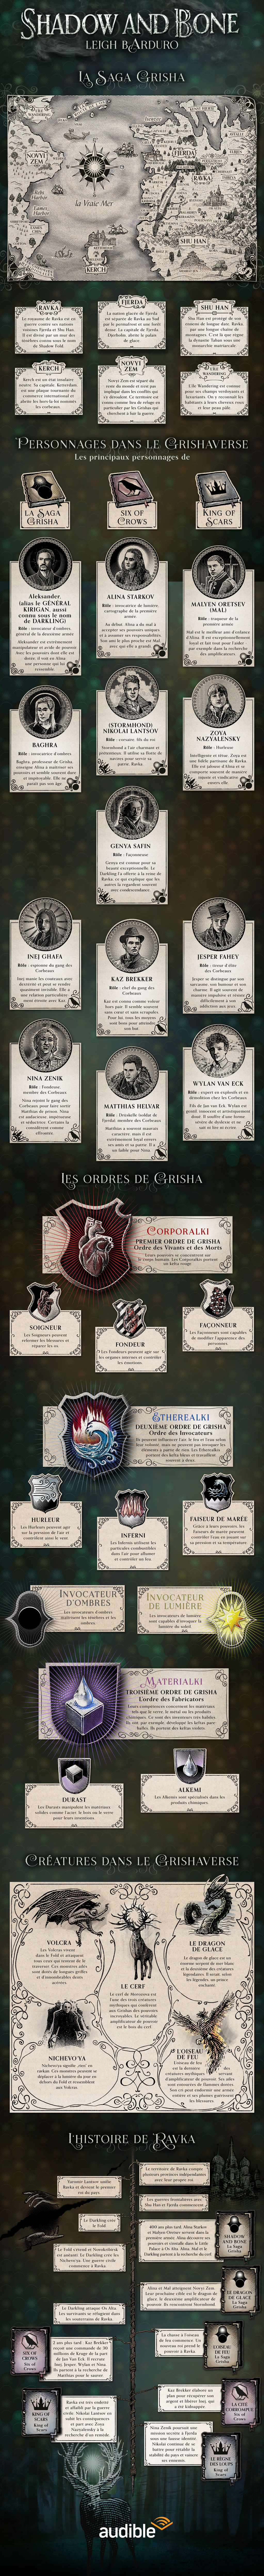 Infographie Shadow and Bone